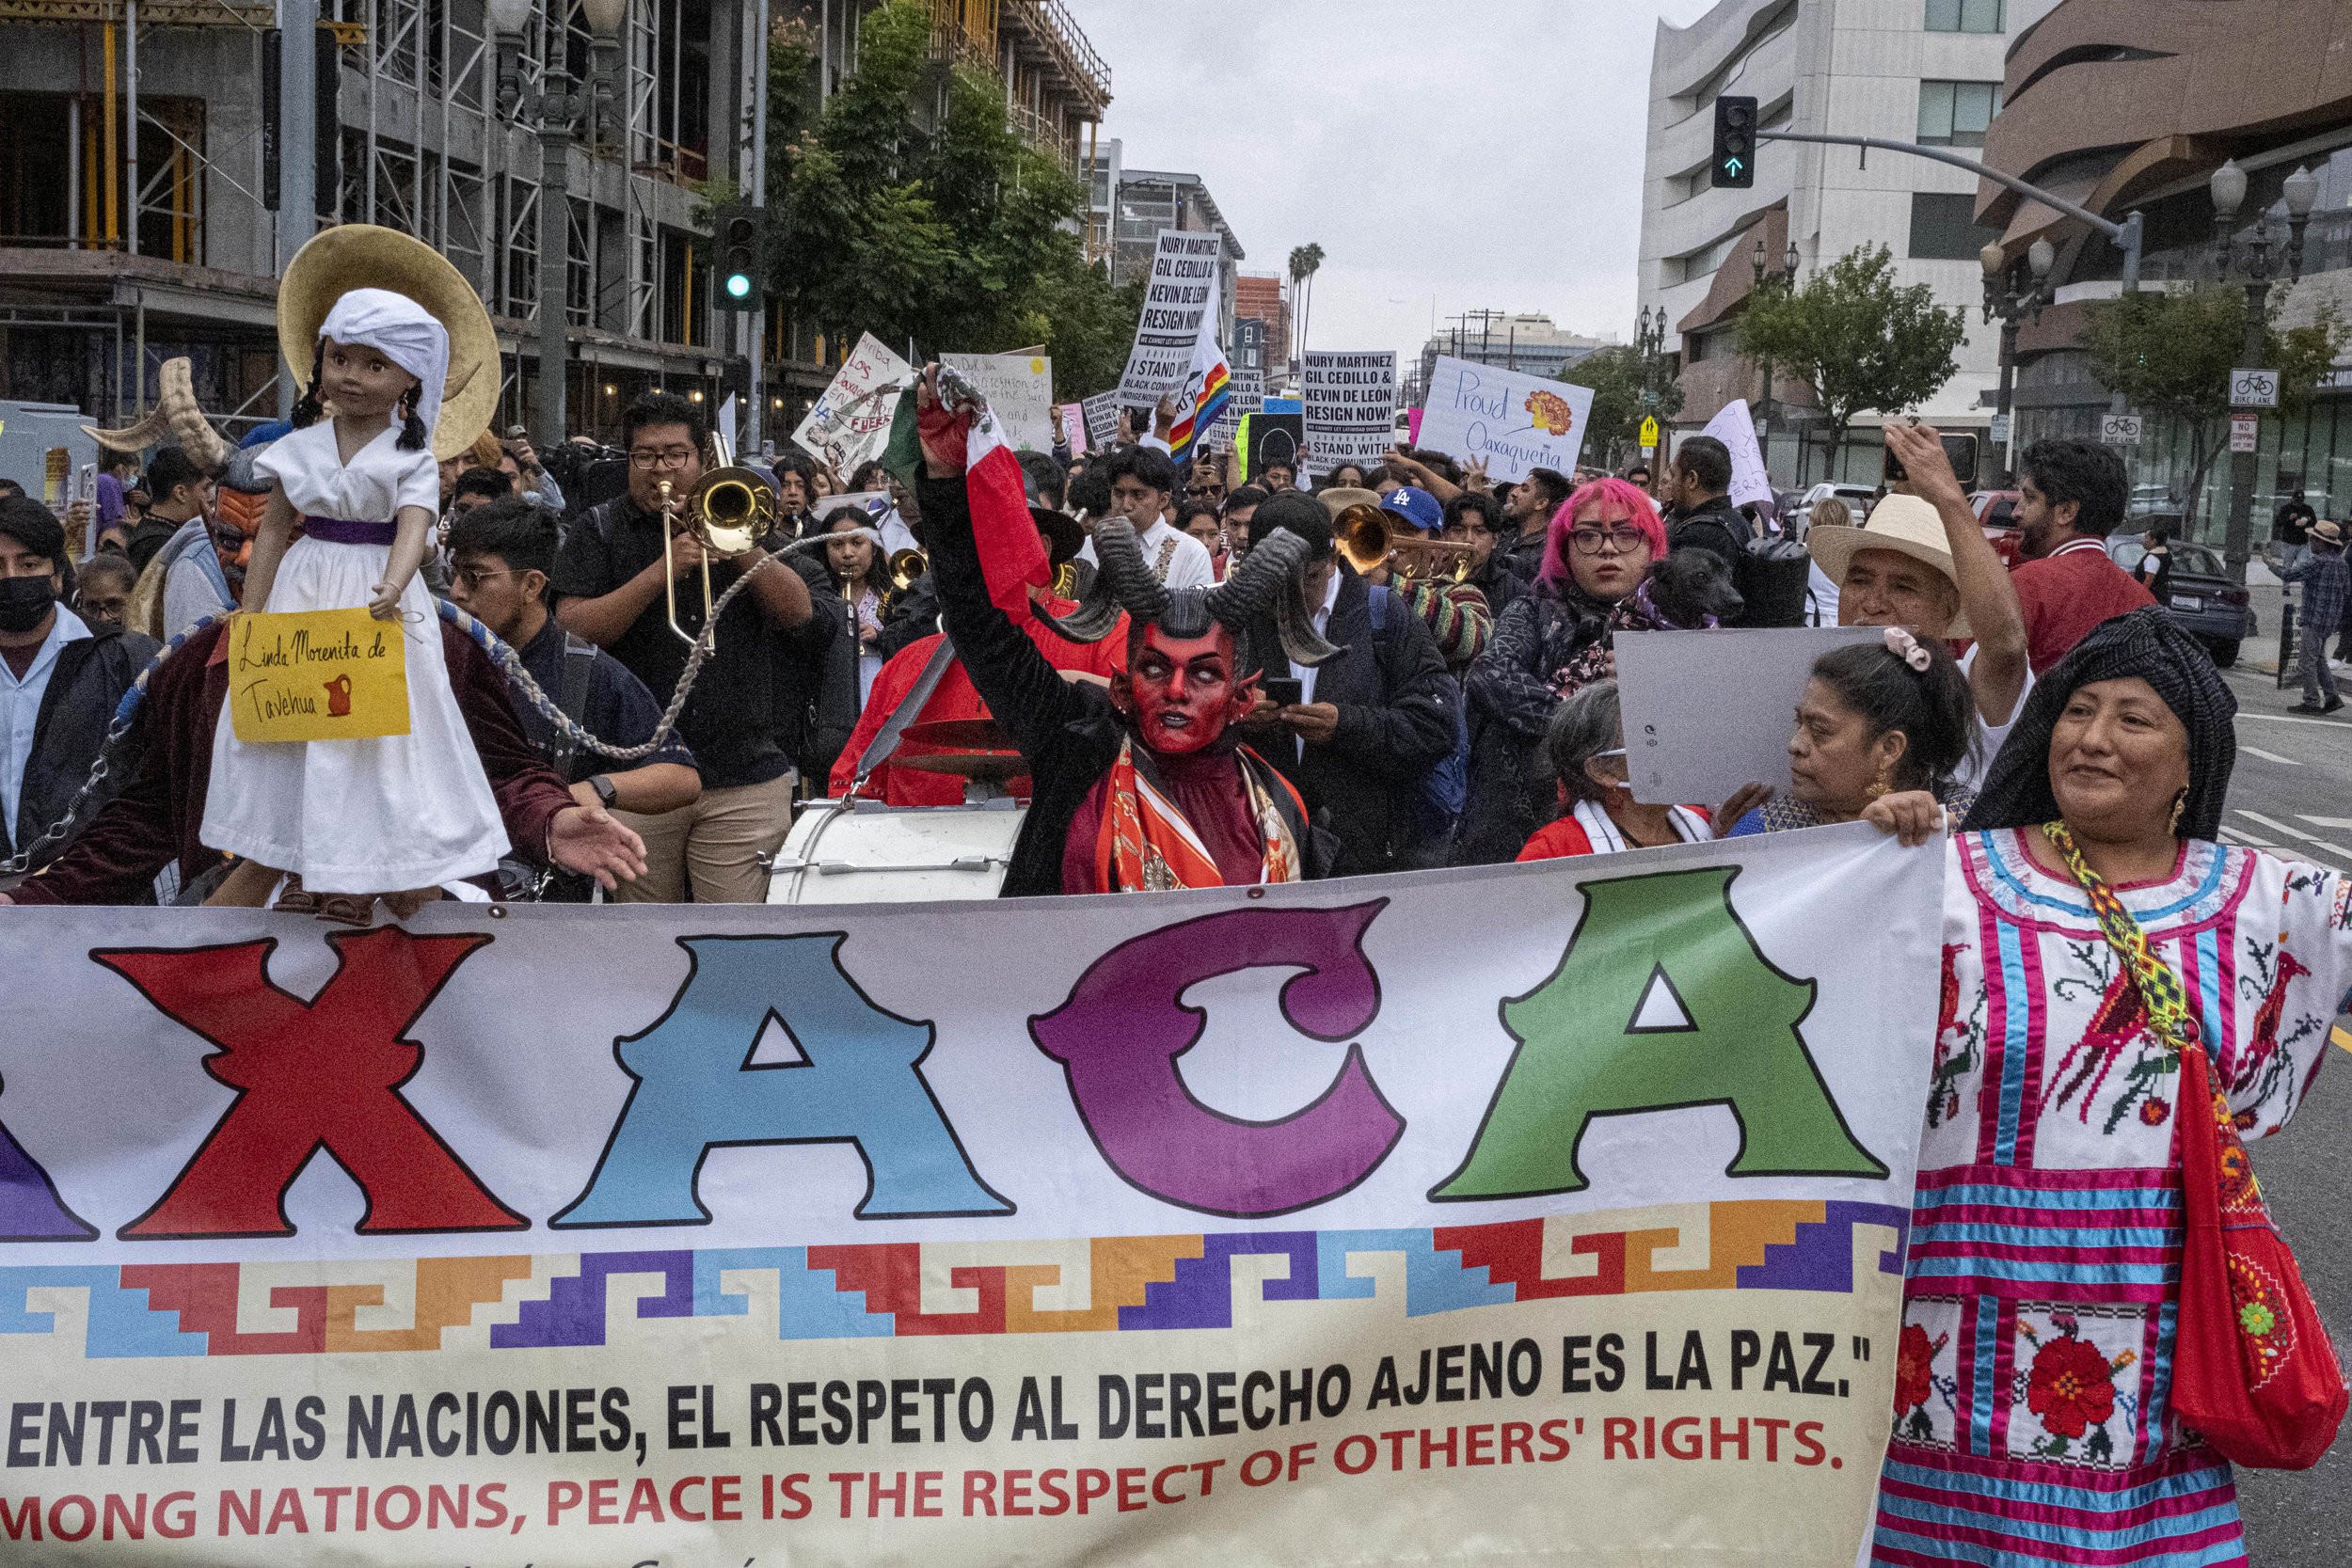  Hundreds of Oaxaca, Zapotec, Mixtec and other indigenous communities gathered to march downtown. Marcha Por Justicia was organized by Comunidades Indigenas en Liderazgo (CIELO), which means Indigenous Communities in Leadership. Marches and protests 